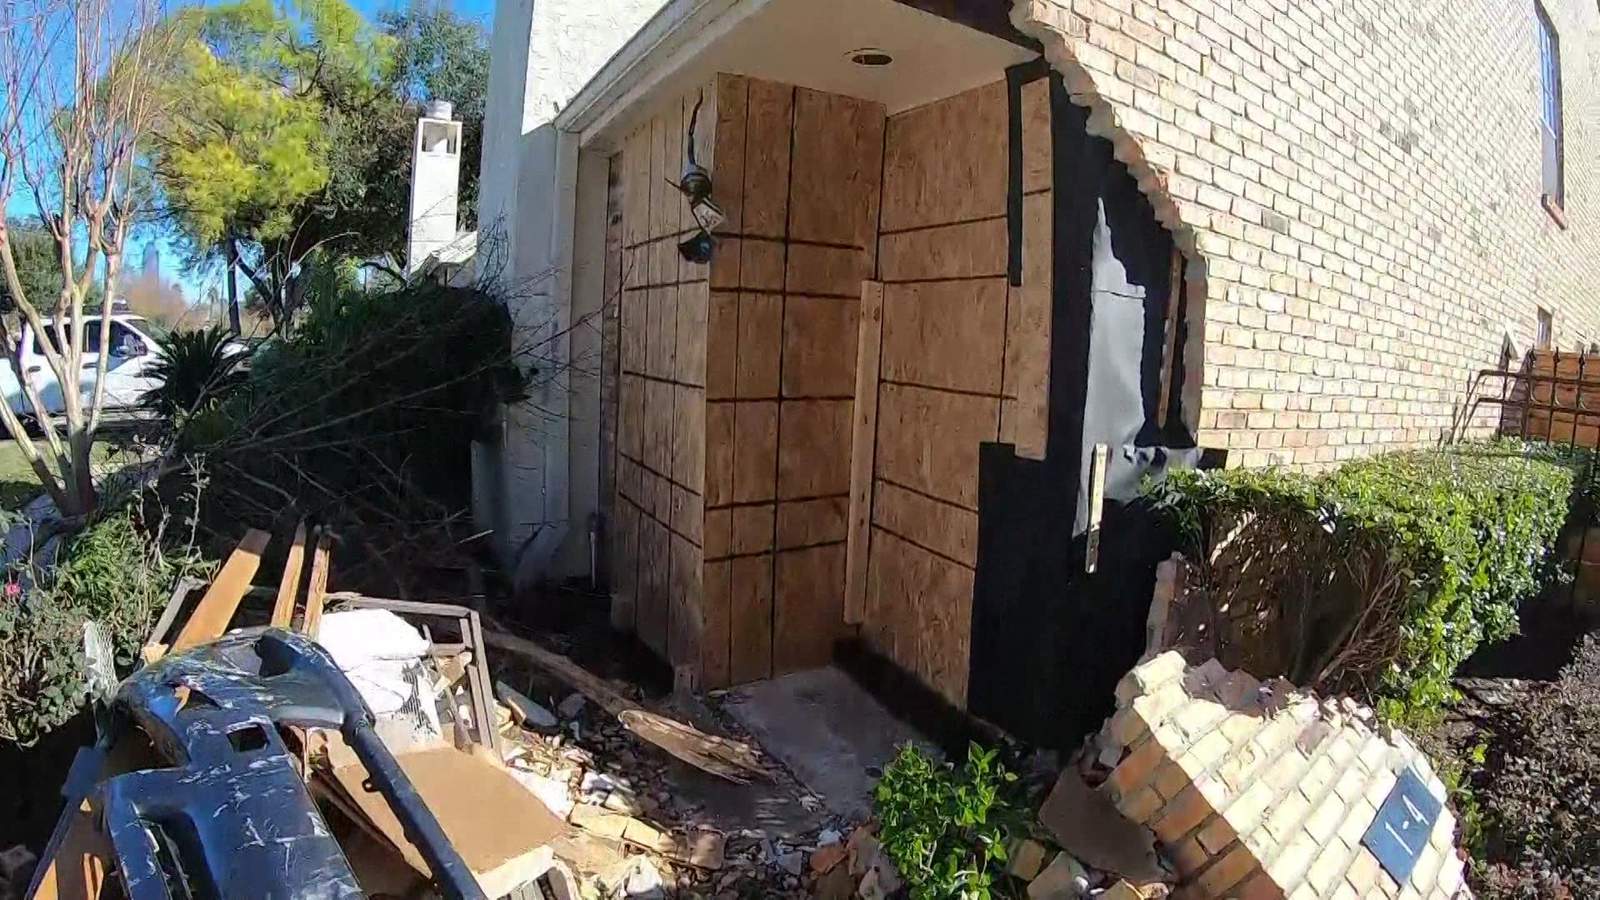 Tough Christmas: Houston family asking for help to move after car smashes into their home